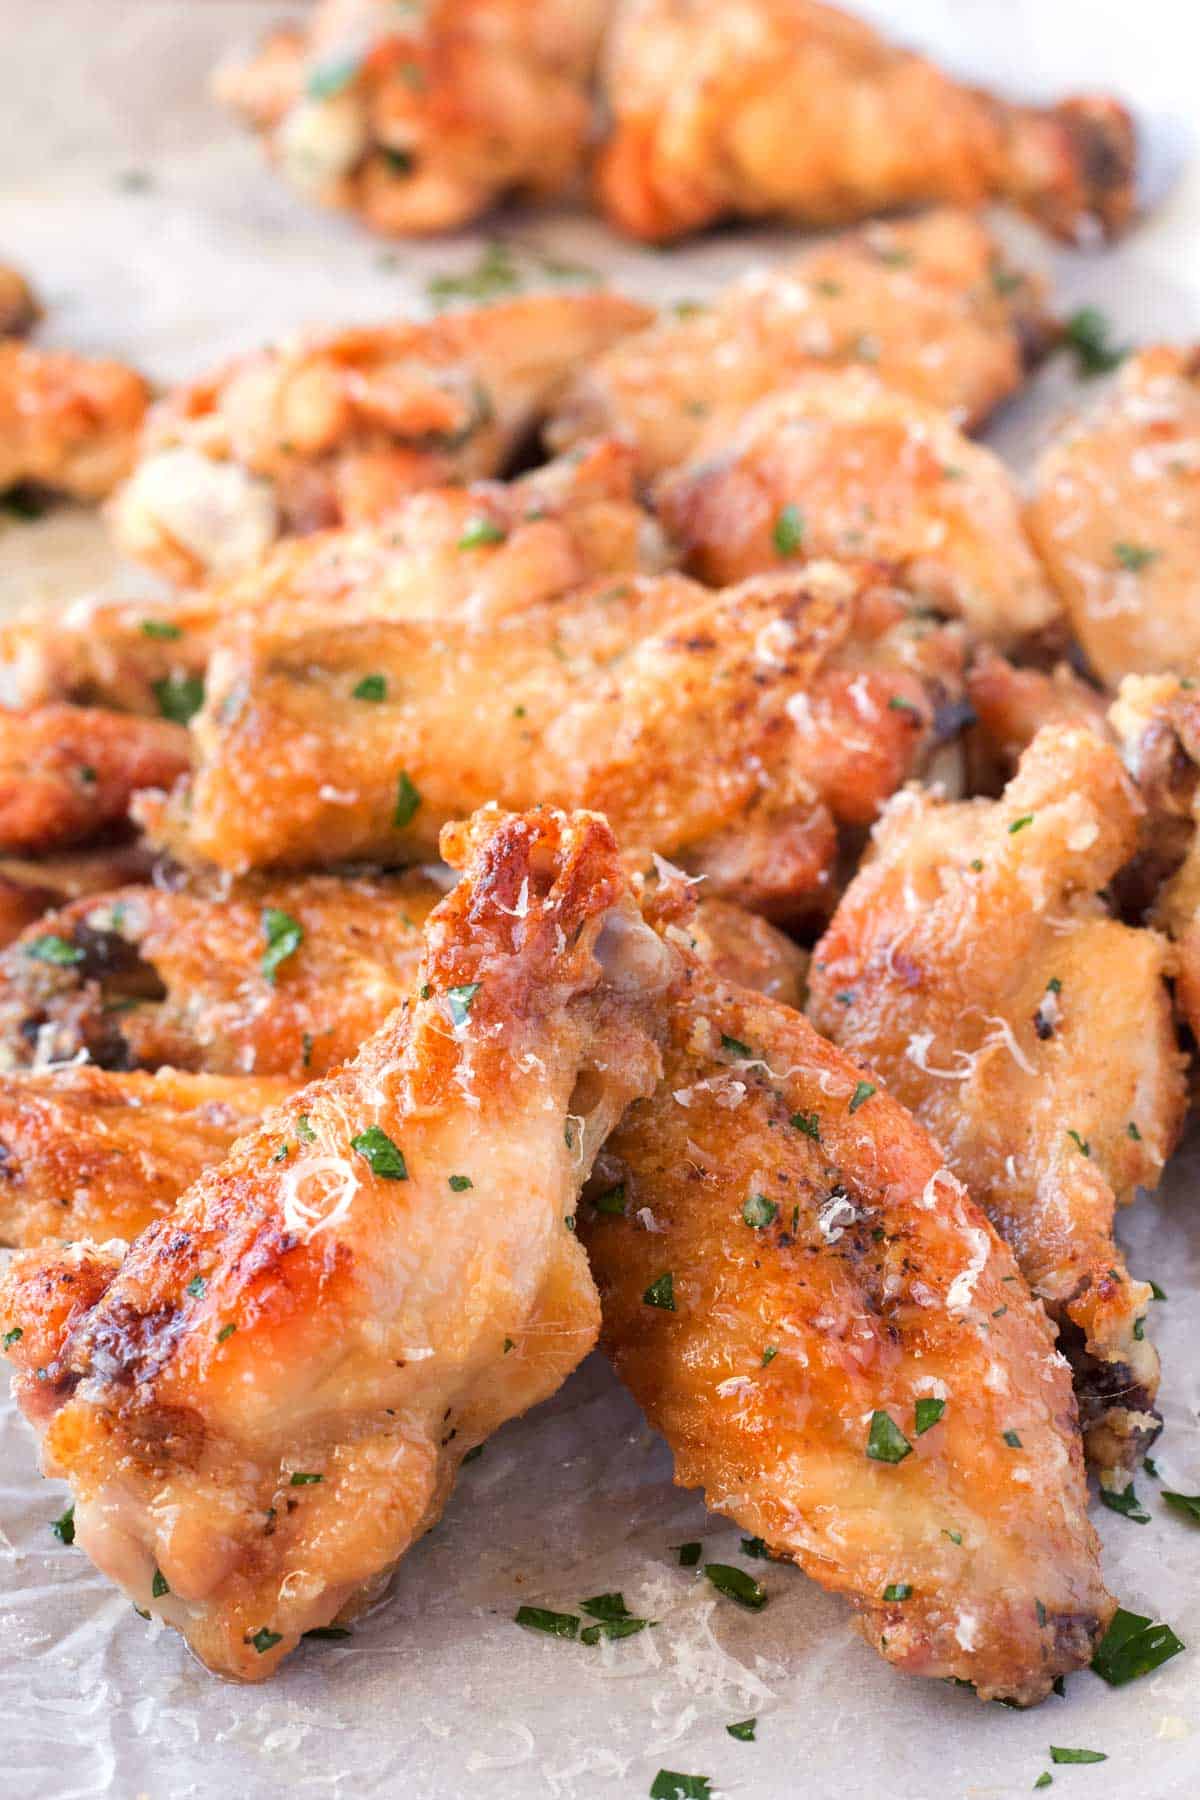 Parchment paper with garlic parmesan chicken wings that are crispy oven baked.